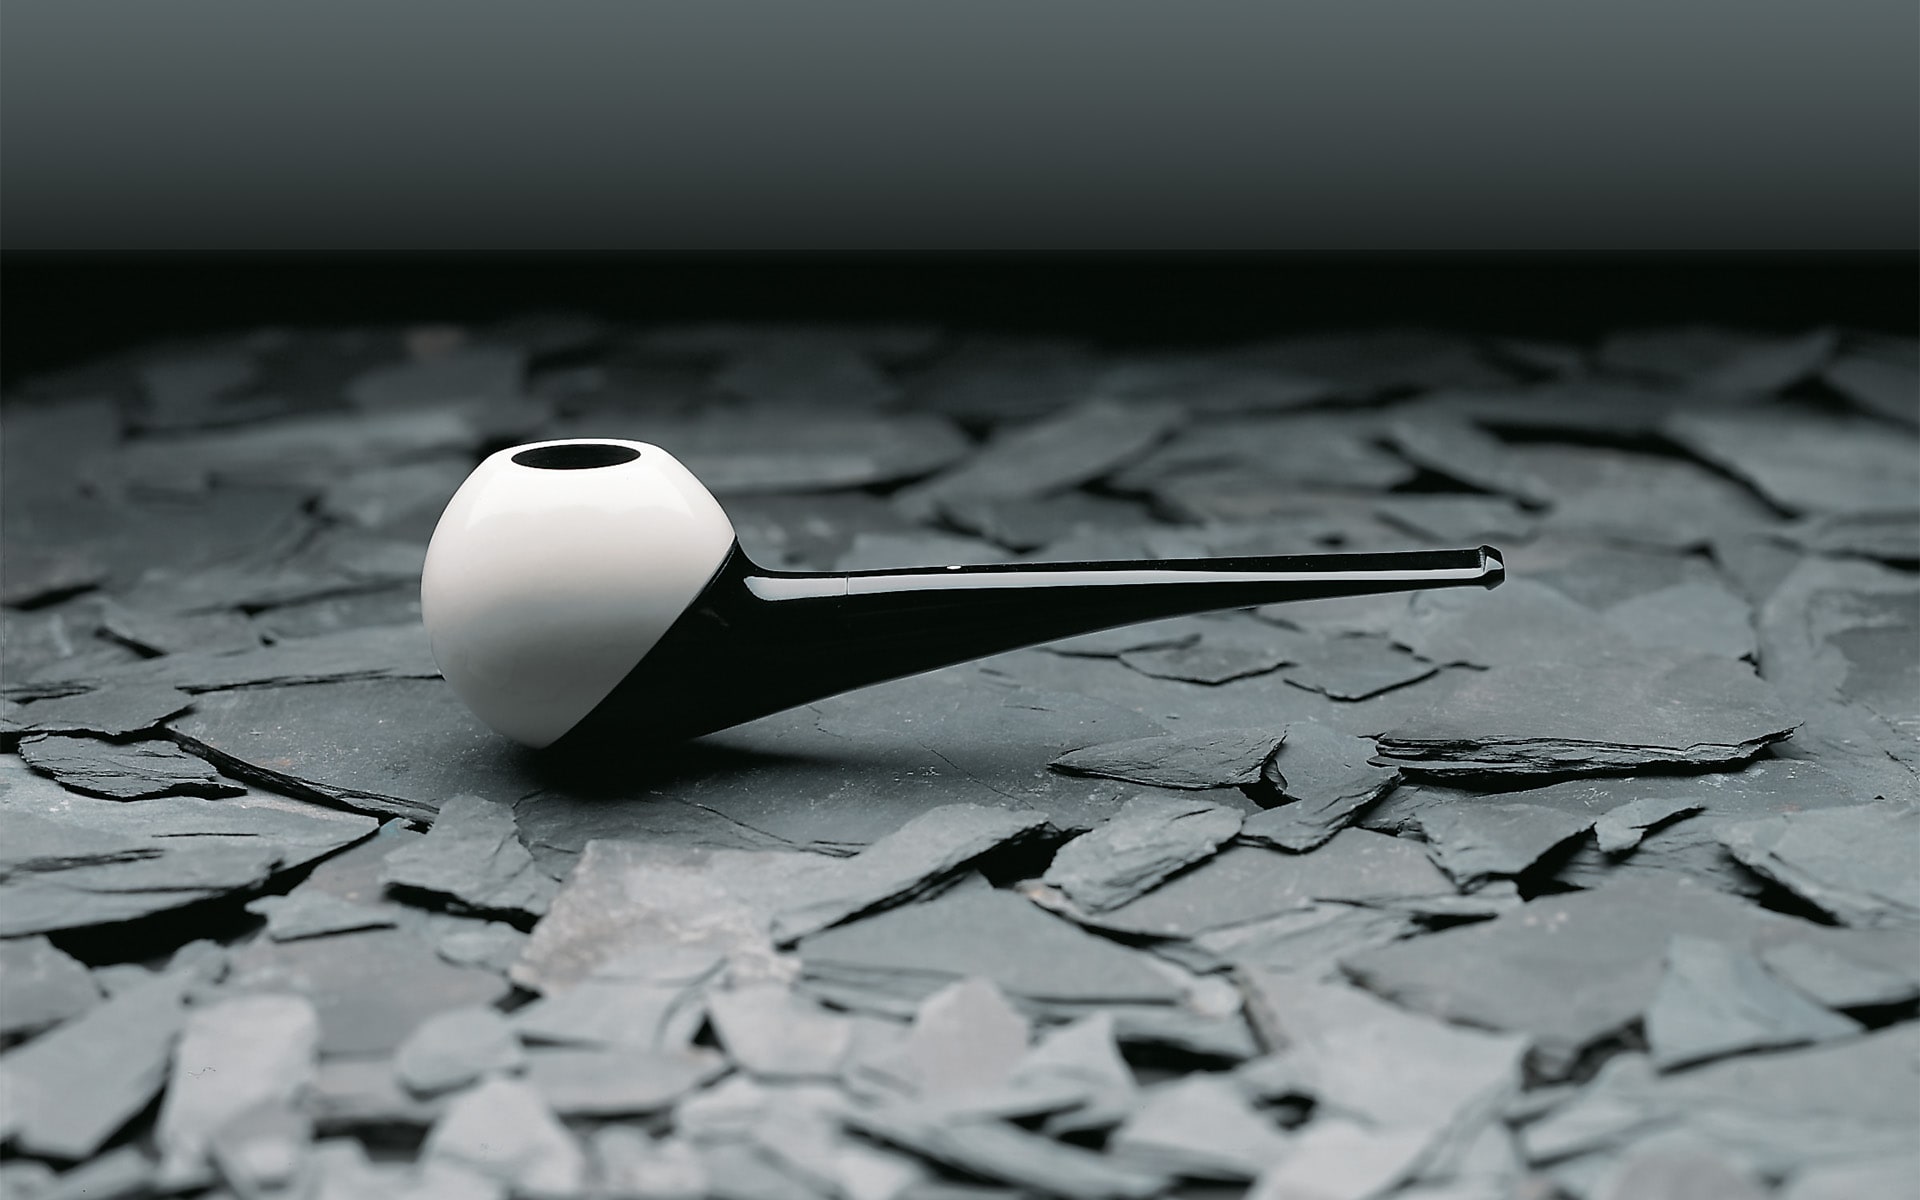 Elegant black-and-white tobacco pipe by ITO Design for Vauen, created in 1987, on black slate pieces